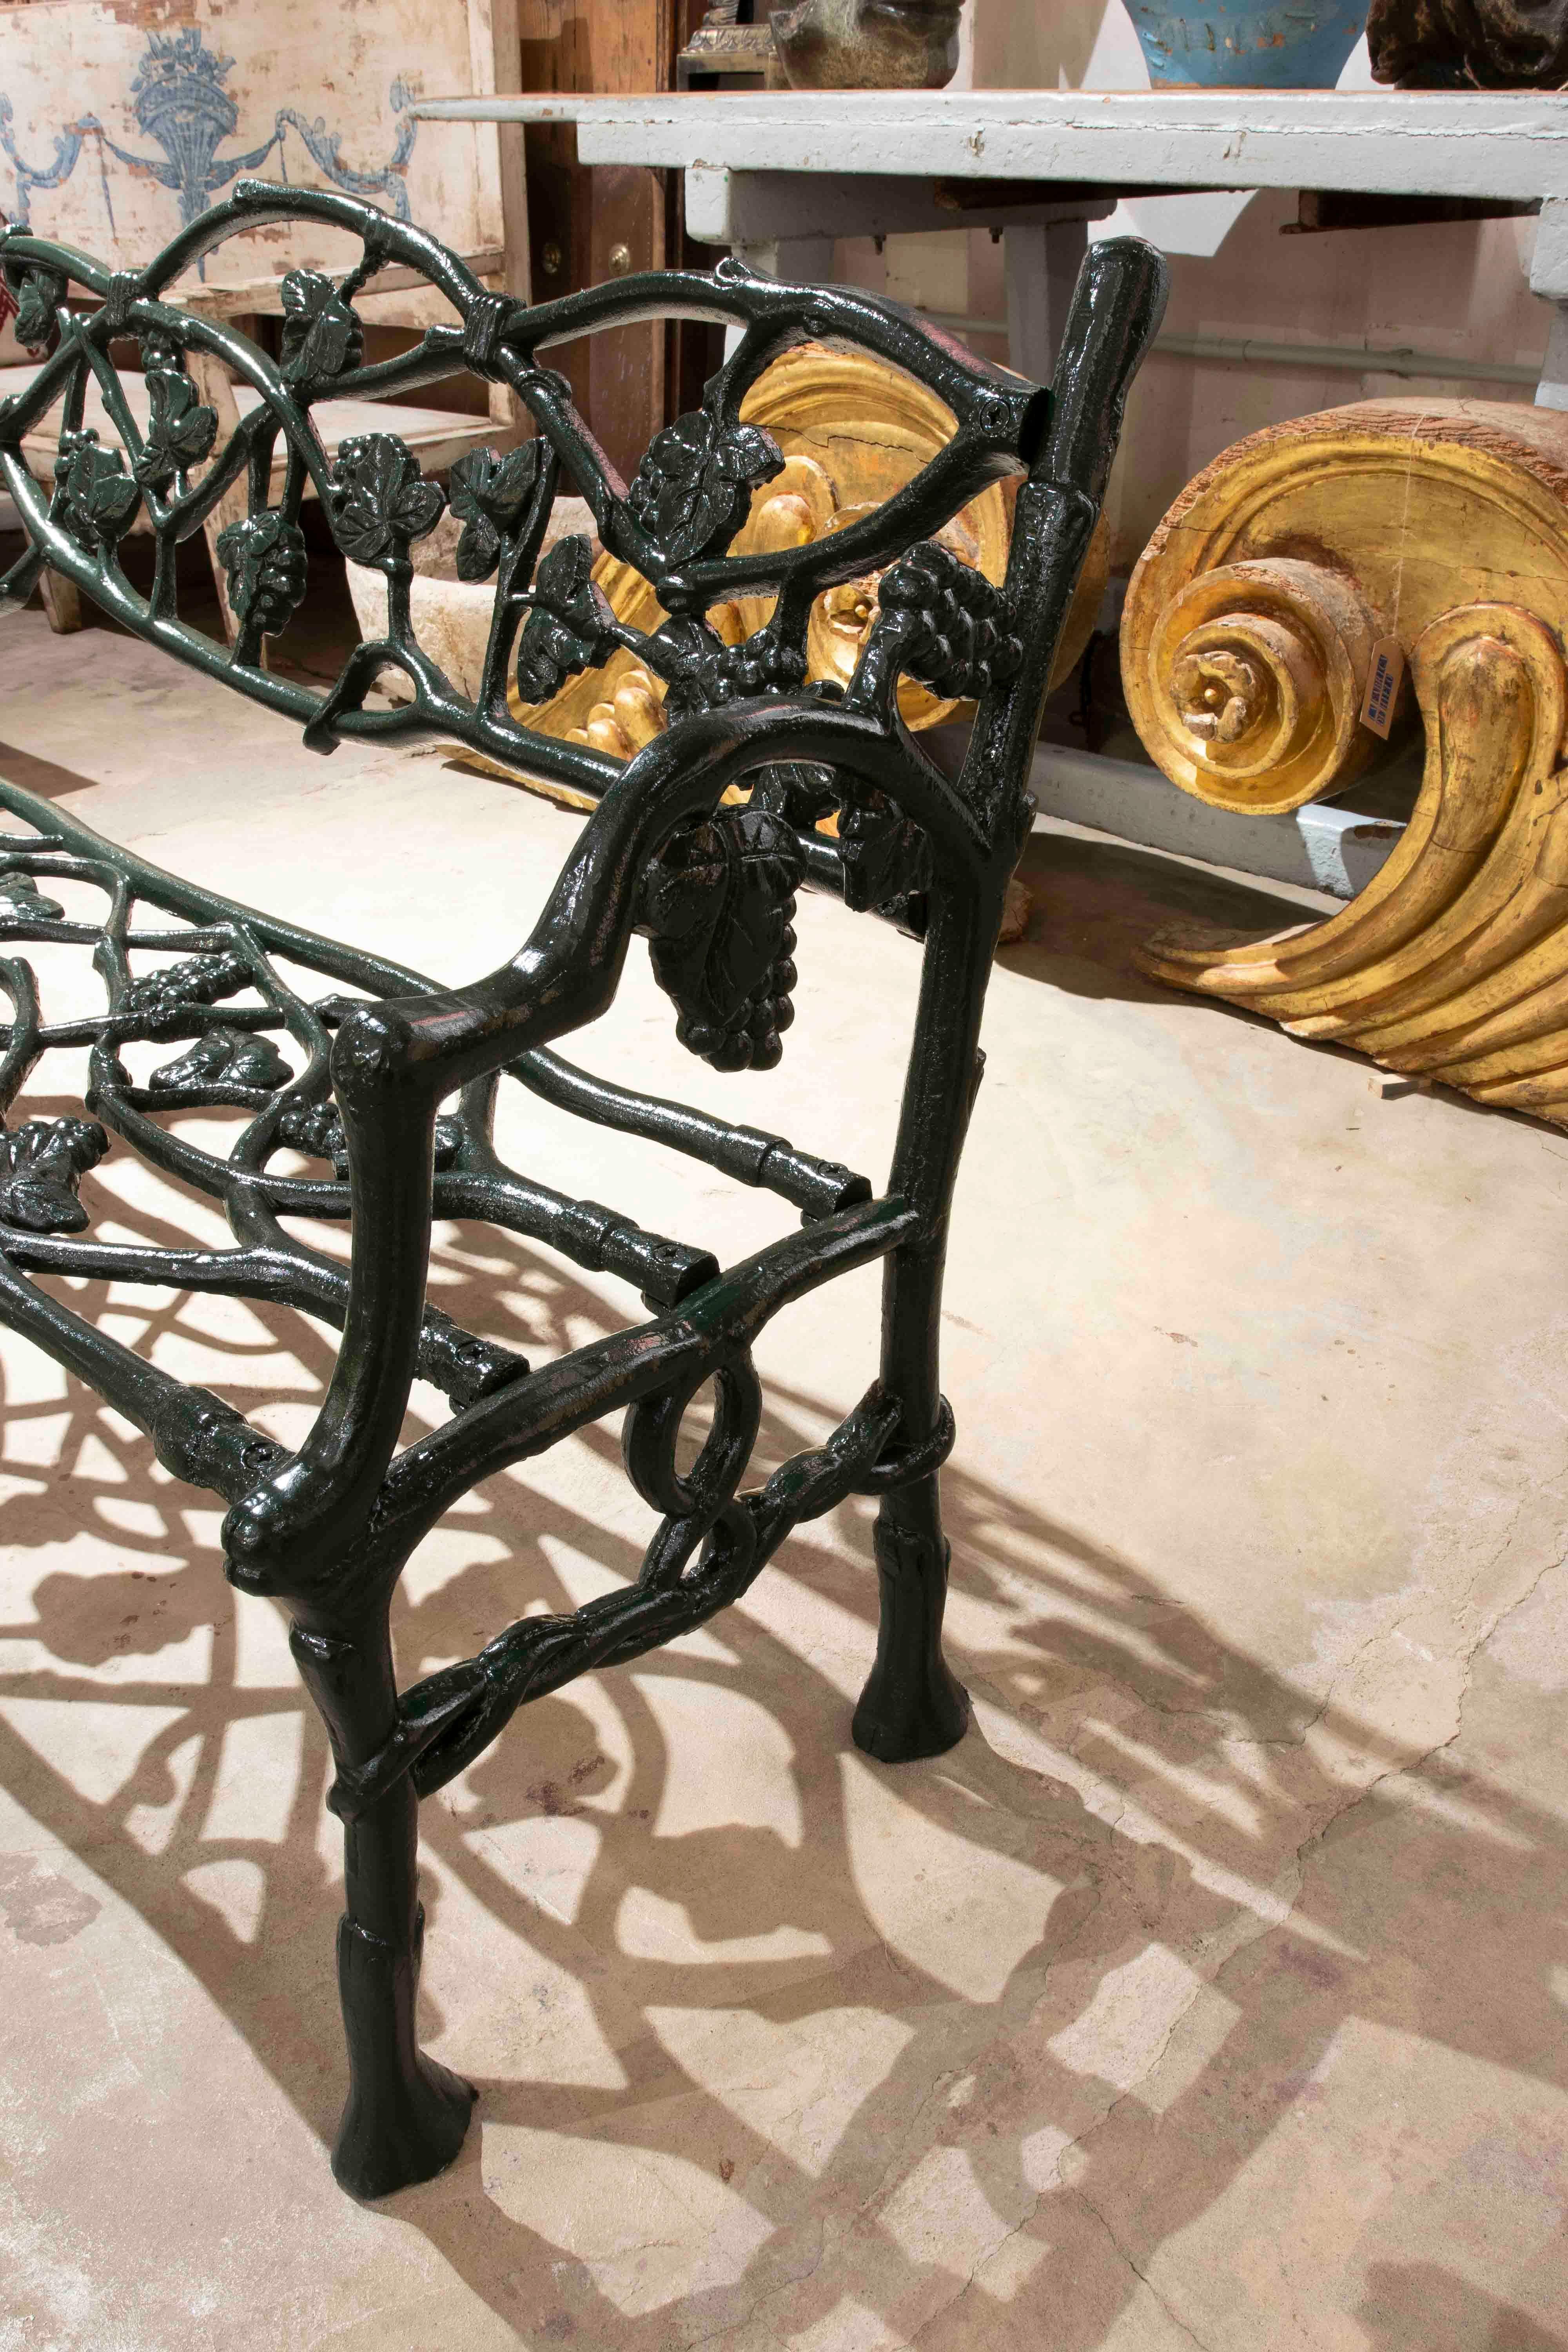 20th Century Iron Garden Bench with Grapes Decoration on the Backrest